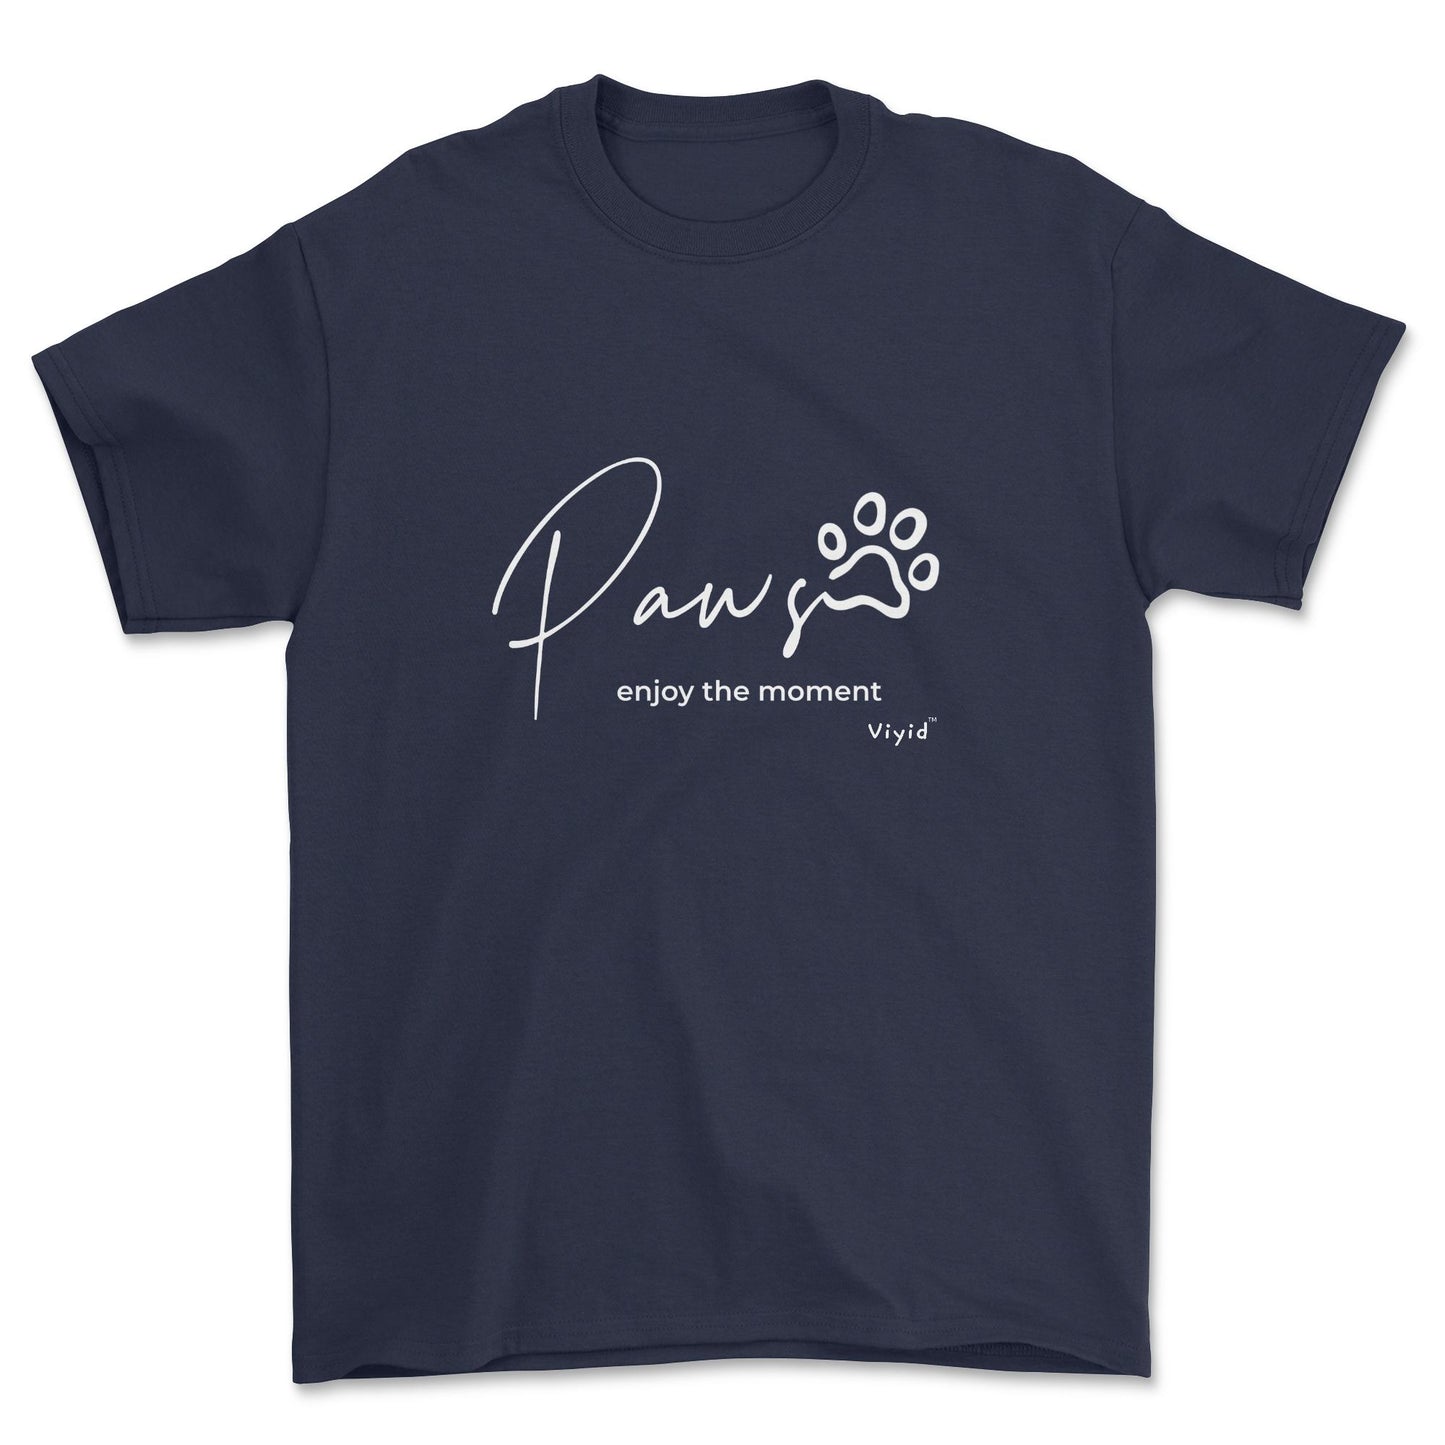 paws enjoy the moment youth t-shirt navy